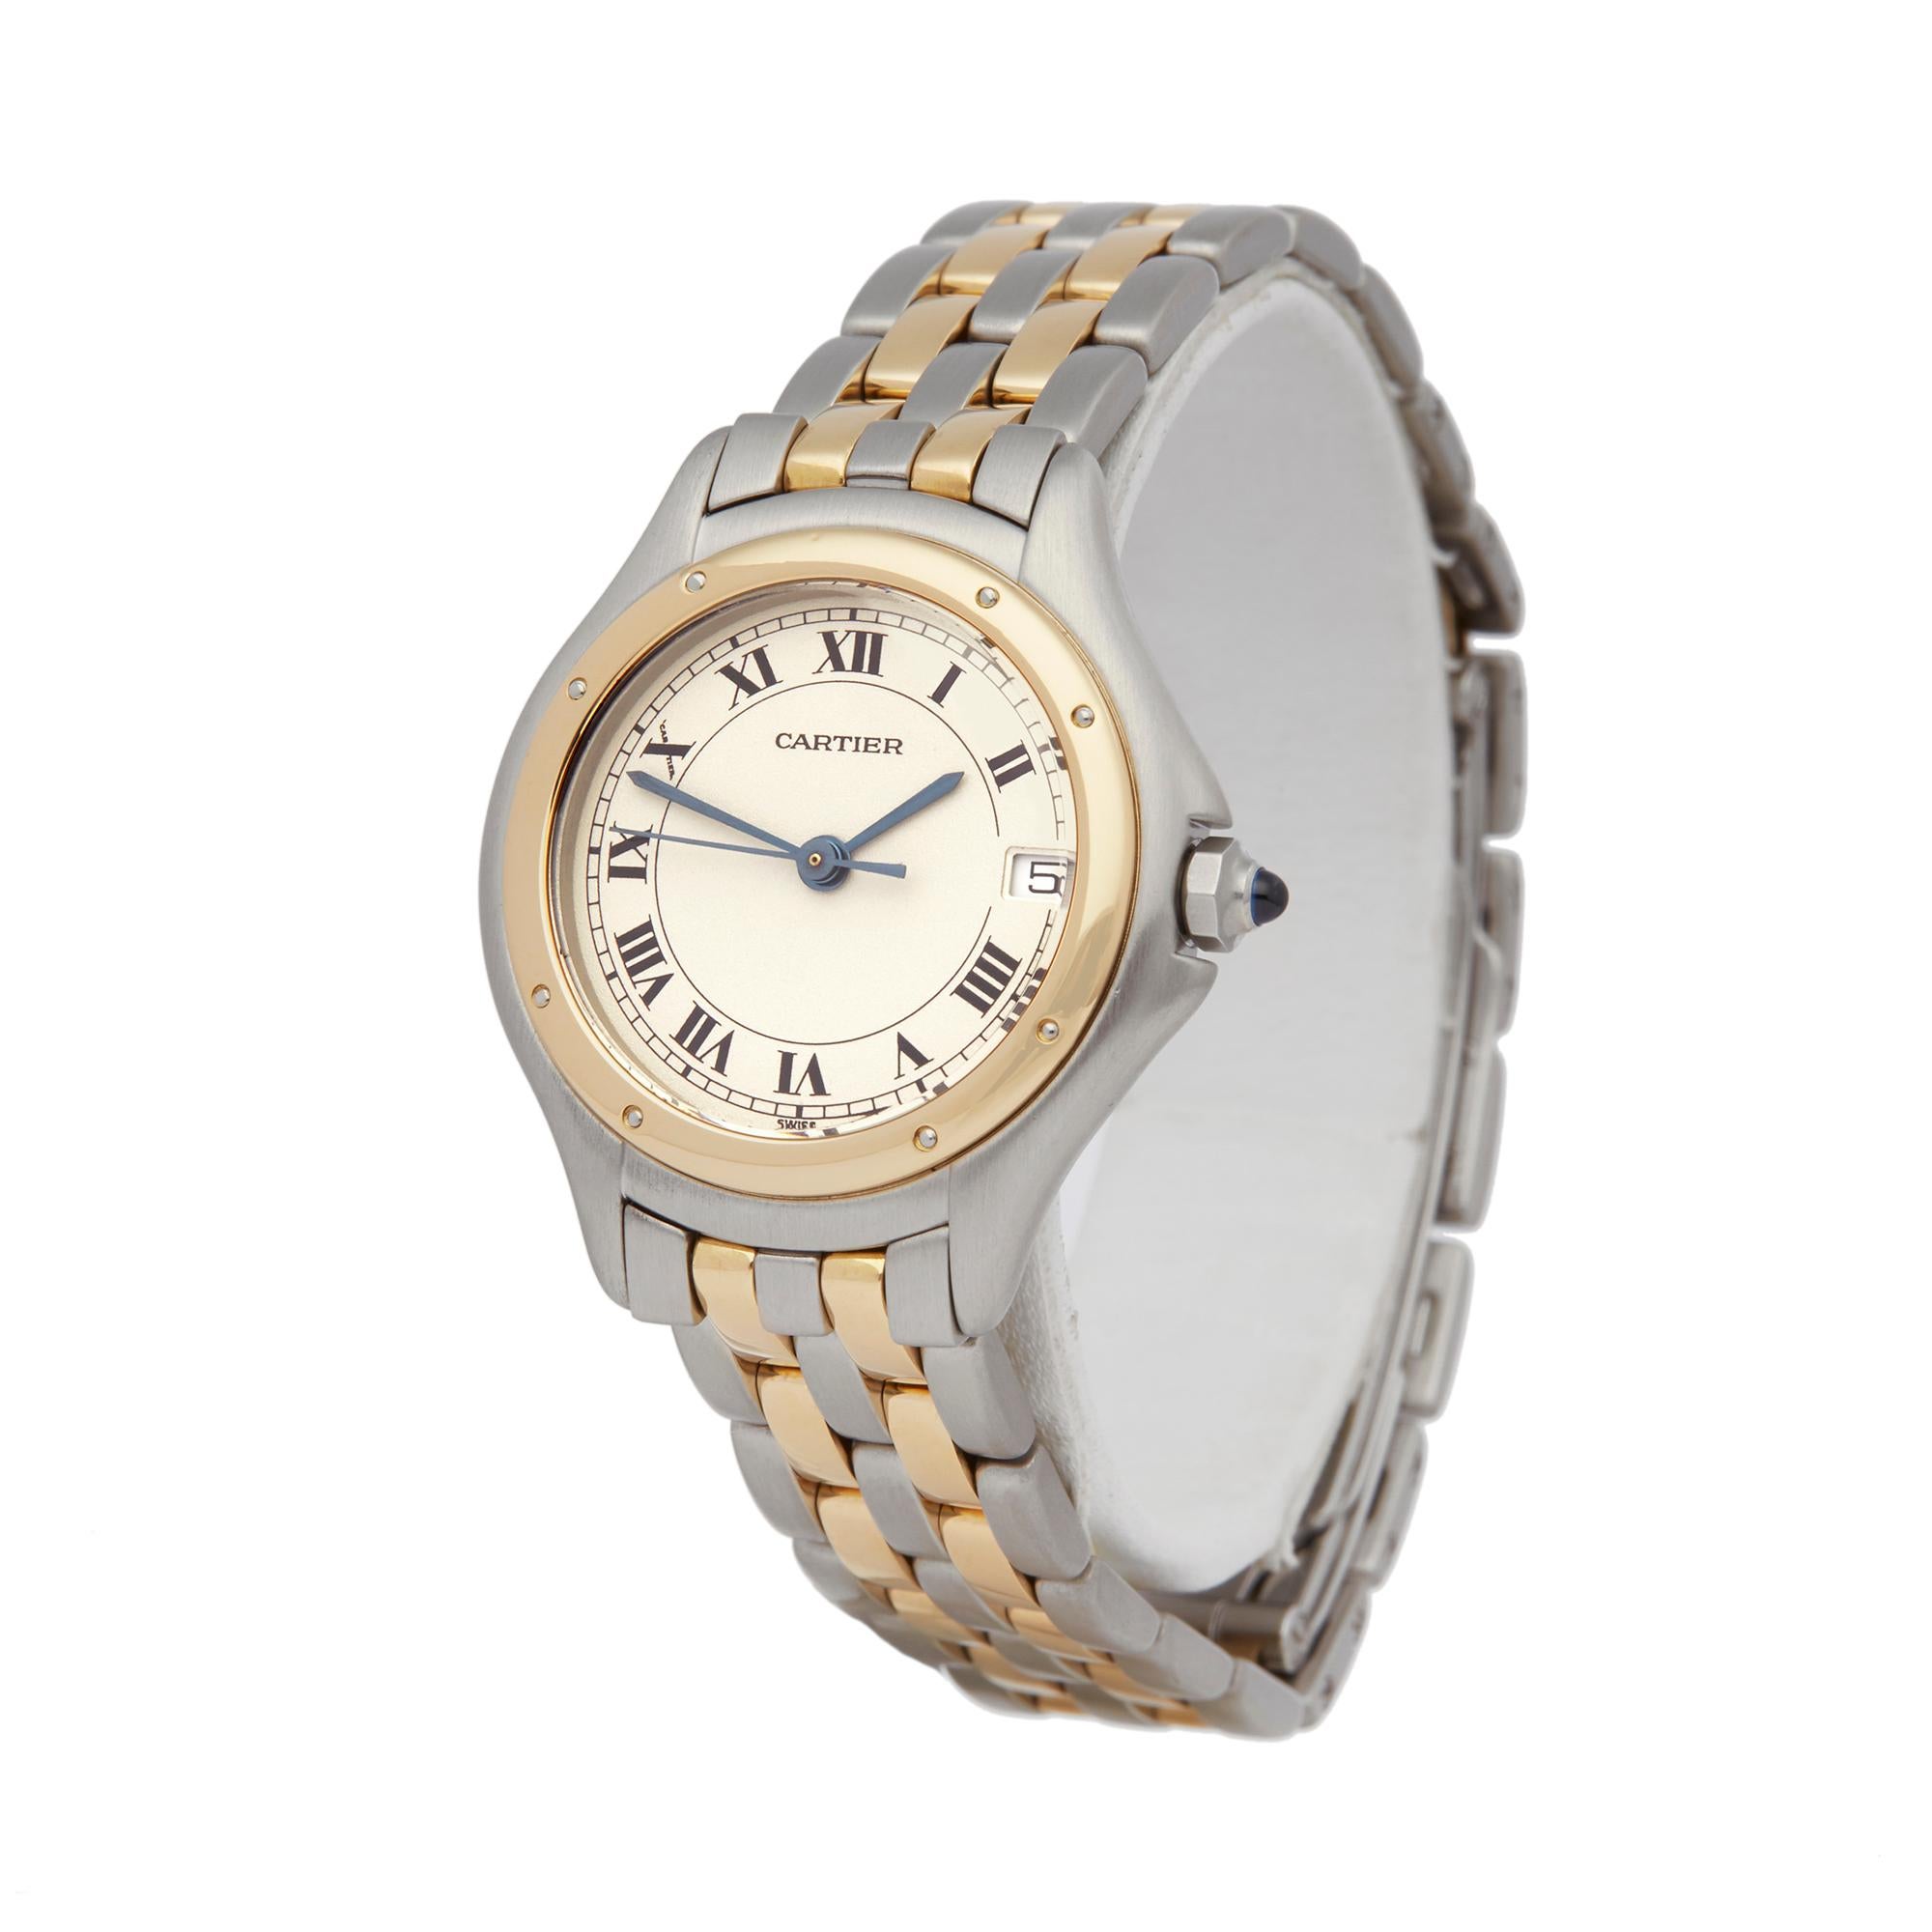 Ref: W5873
Manufacturer: Cartier
Model: Panthere Cougar
Model Ref: 187906
Age: 
Gender: Ladies
Complete With: Box only 
Dial: Cream Roman
Glass: Sapphire Crystal
Movement: Quartz
Water Resistance: To Manufacturers Specifications
Case: Stainless